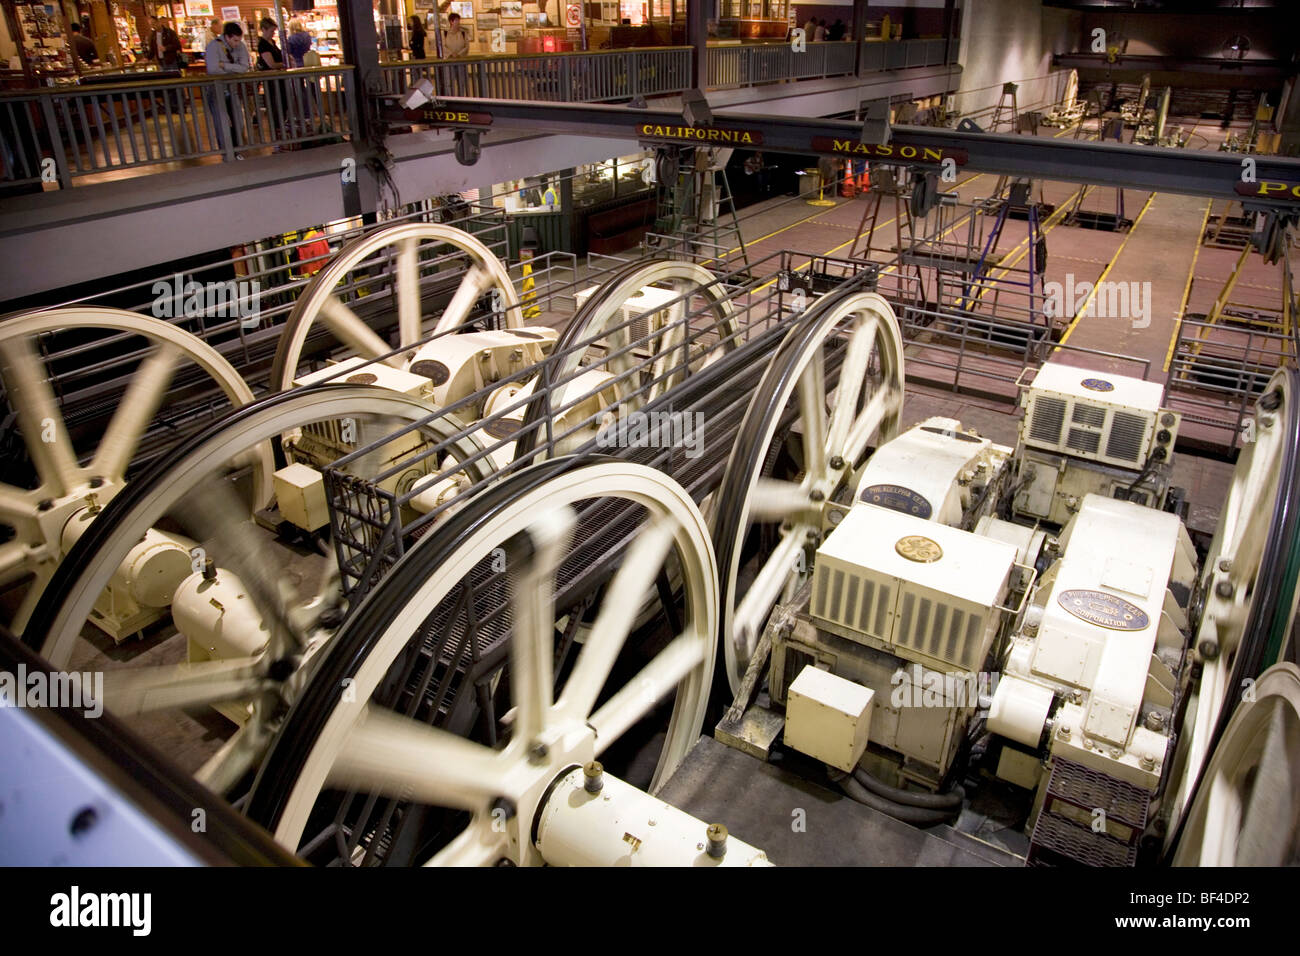 Cable Car Museum with PowerHouse showing cable drives for different routes, Washington and Mason Streets, San Francisco Stock Photo